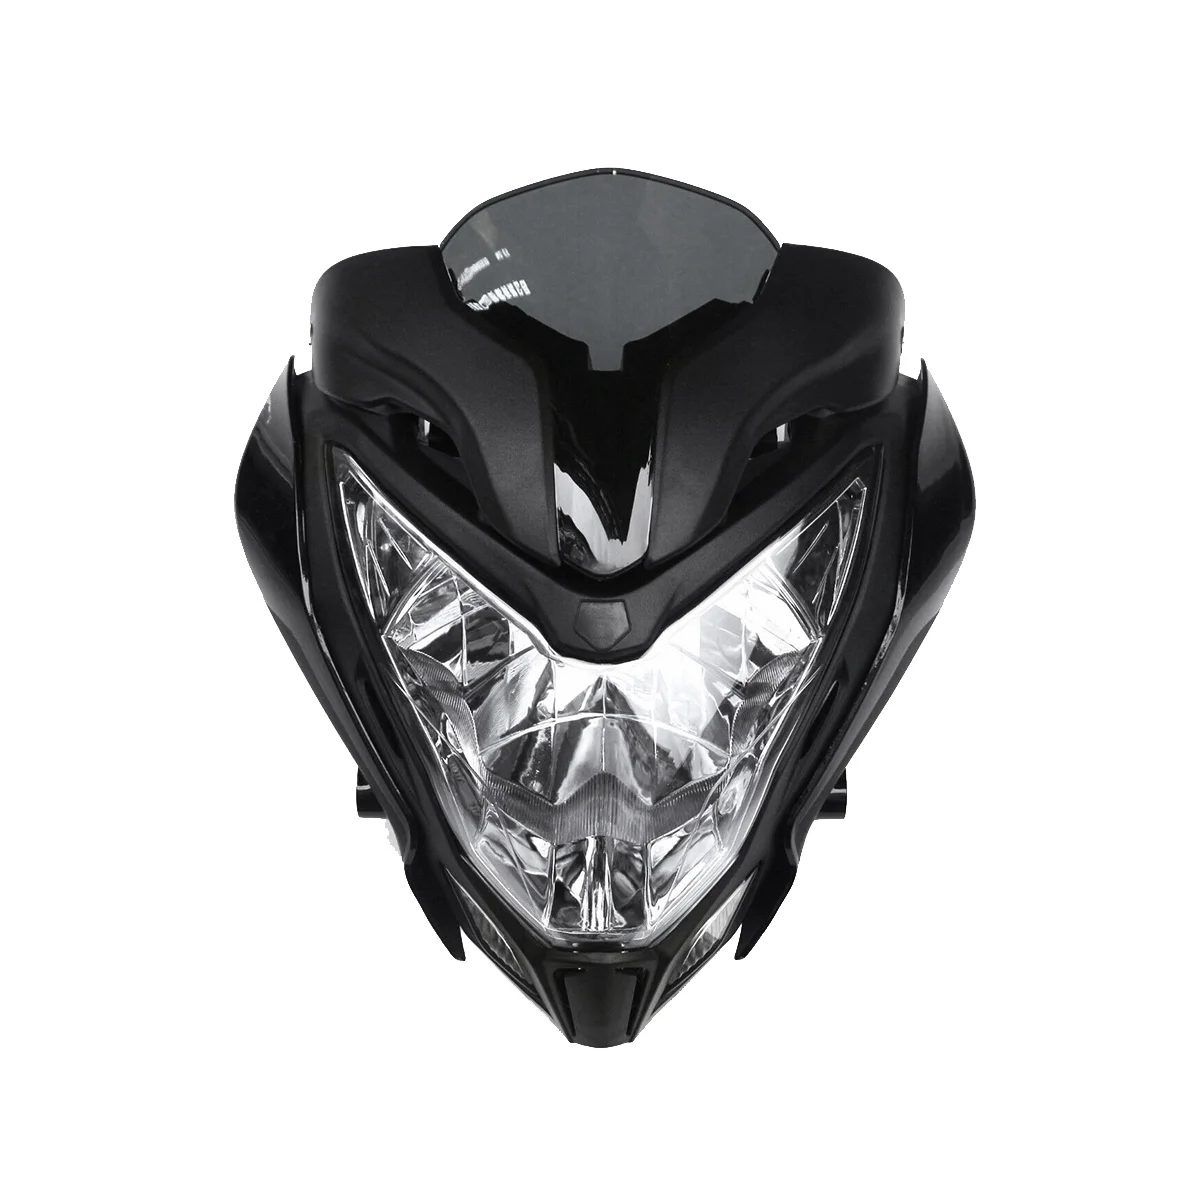 black-motorcycle-headlight-assembly-motorcycle-headlight-headlight-assembly-for-bajaj-pulsar-150-200